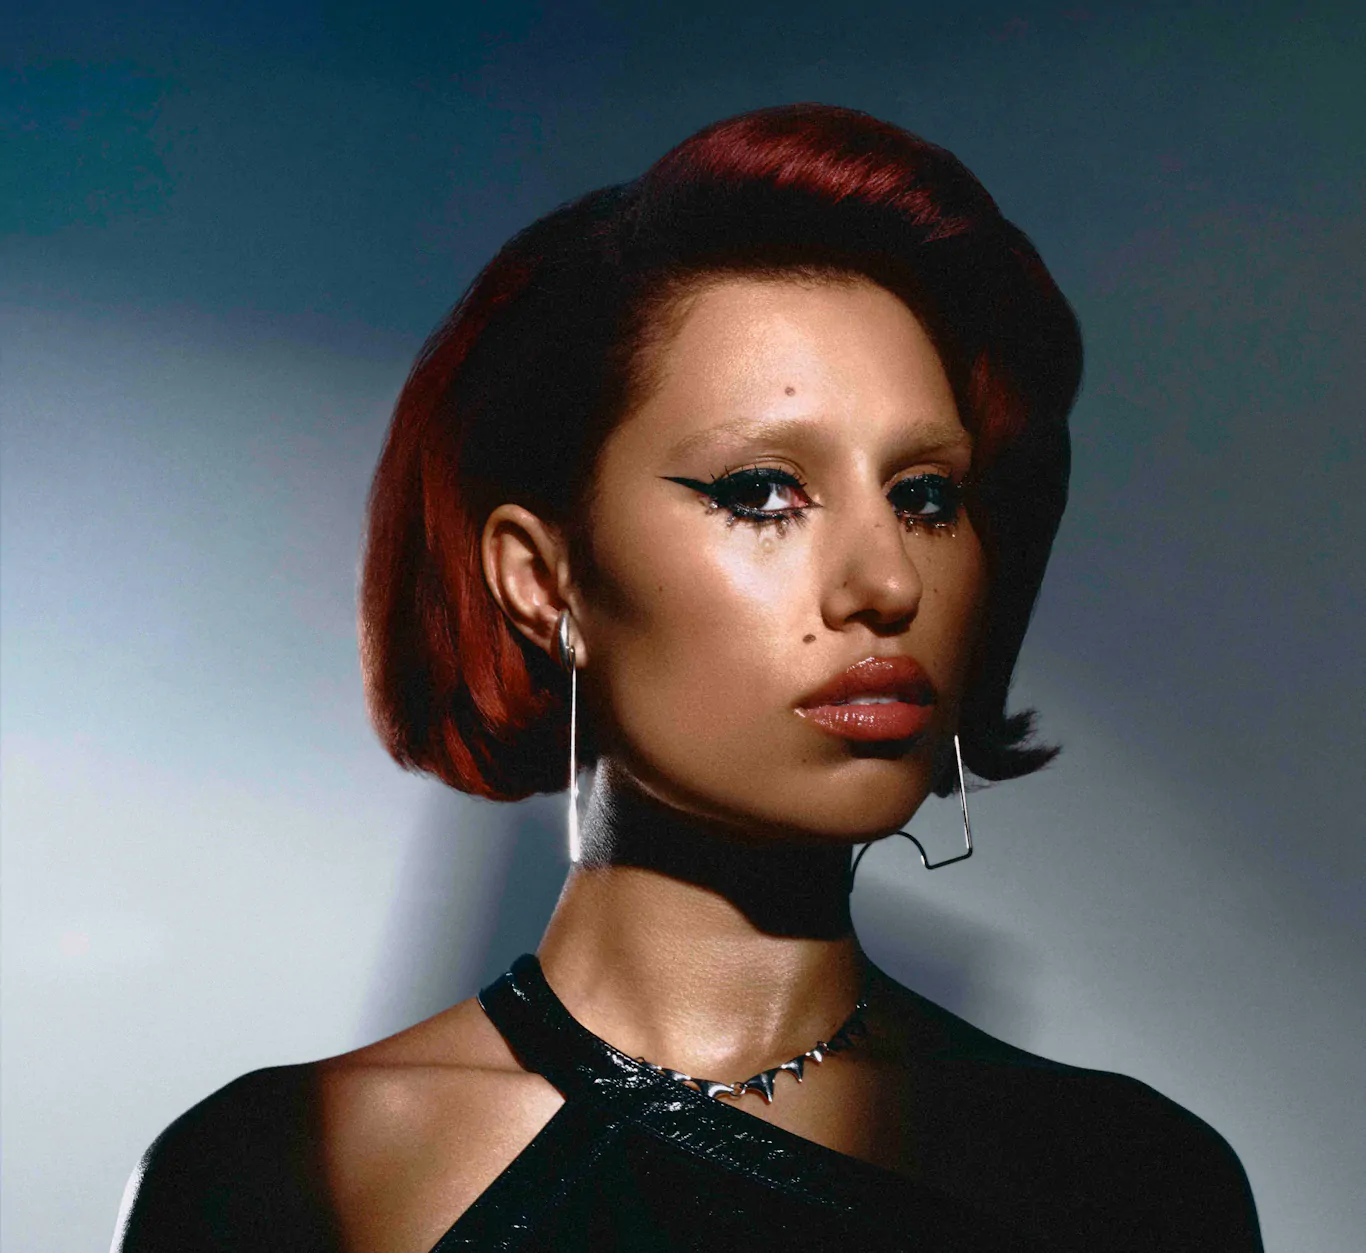 Croydon R&B singer-songwriter RAYE announces Belfast show at Limelight 1 on 5th March 2023